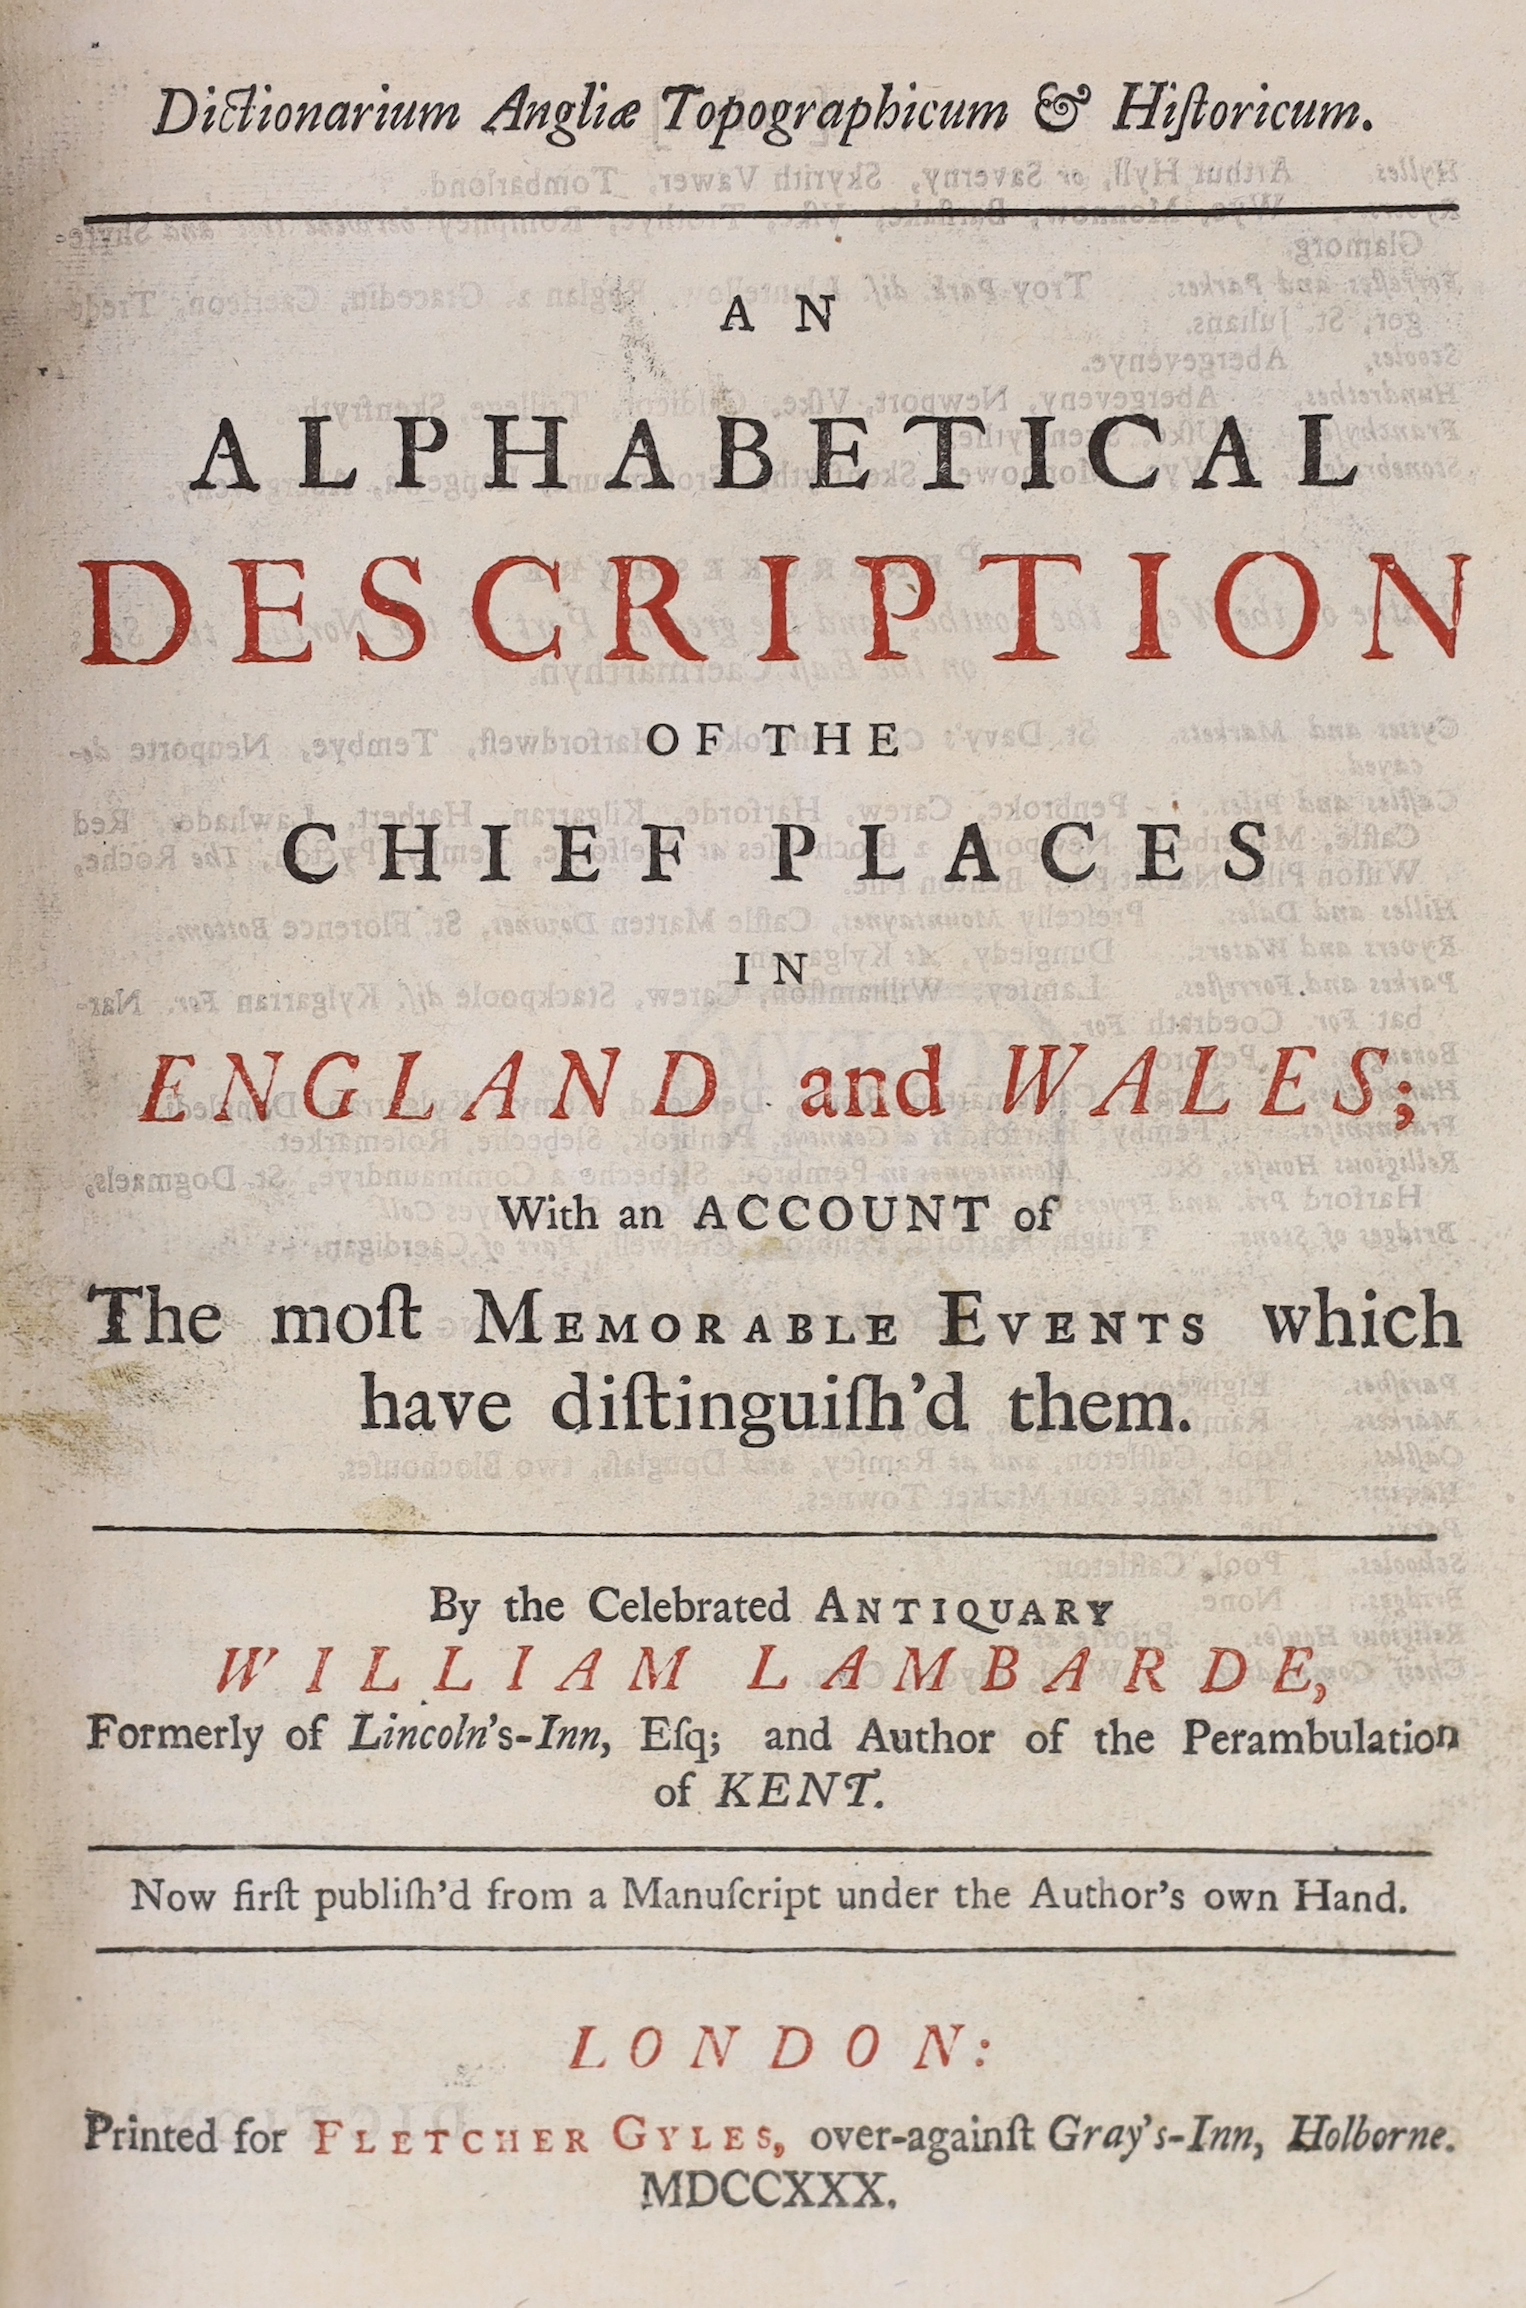 Lambarde, William - Dictionarium Angliae Topographicum & Historicum. An alphabetical description of the chief places in England and Wales ... portrait frontis., head and tailpiece decorations; contemp. gilt-ruled calf, s